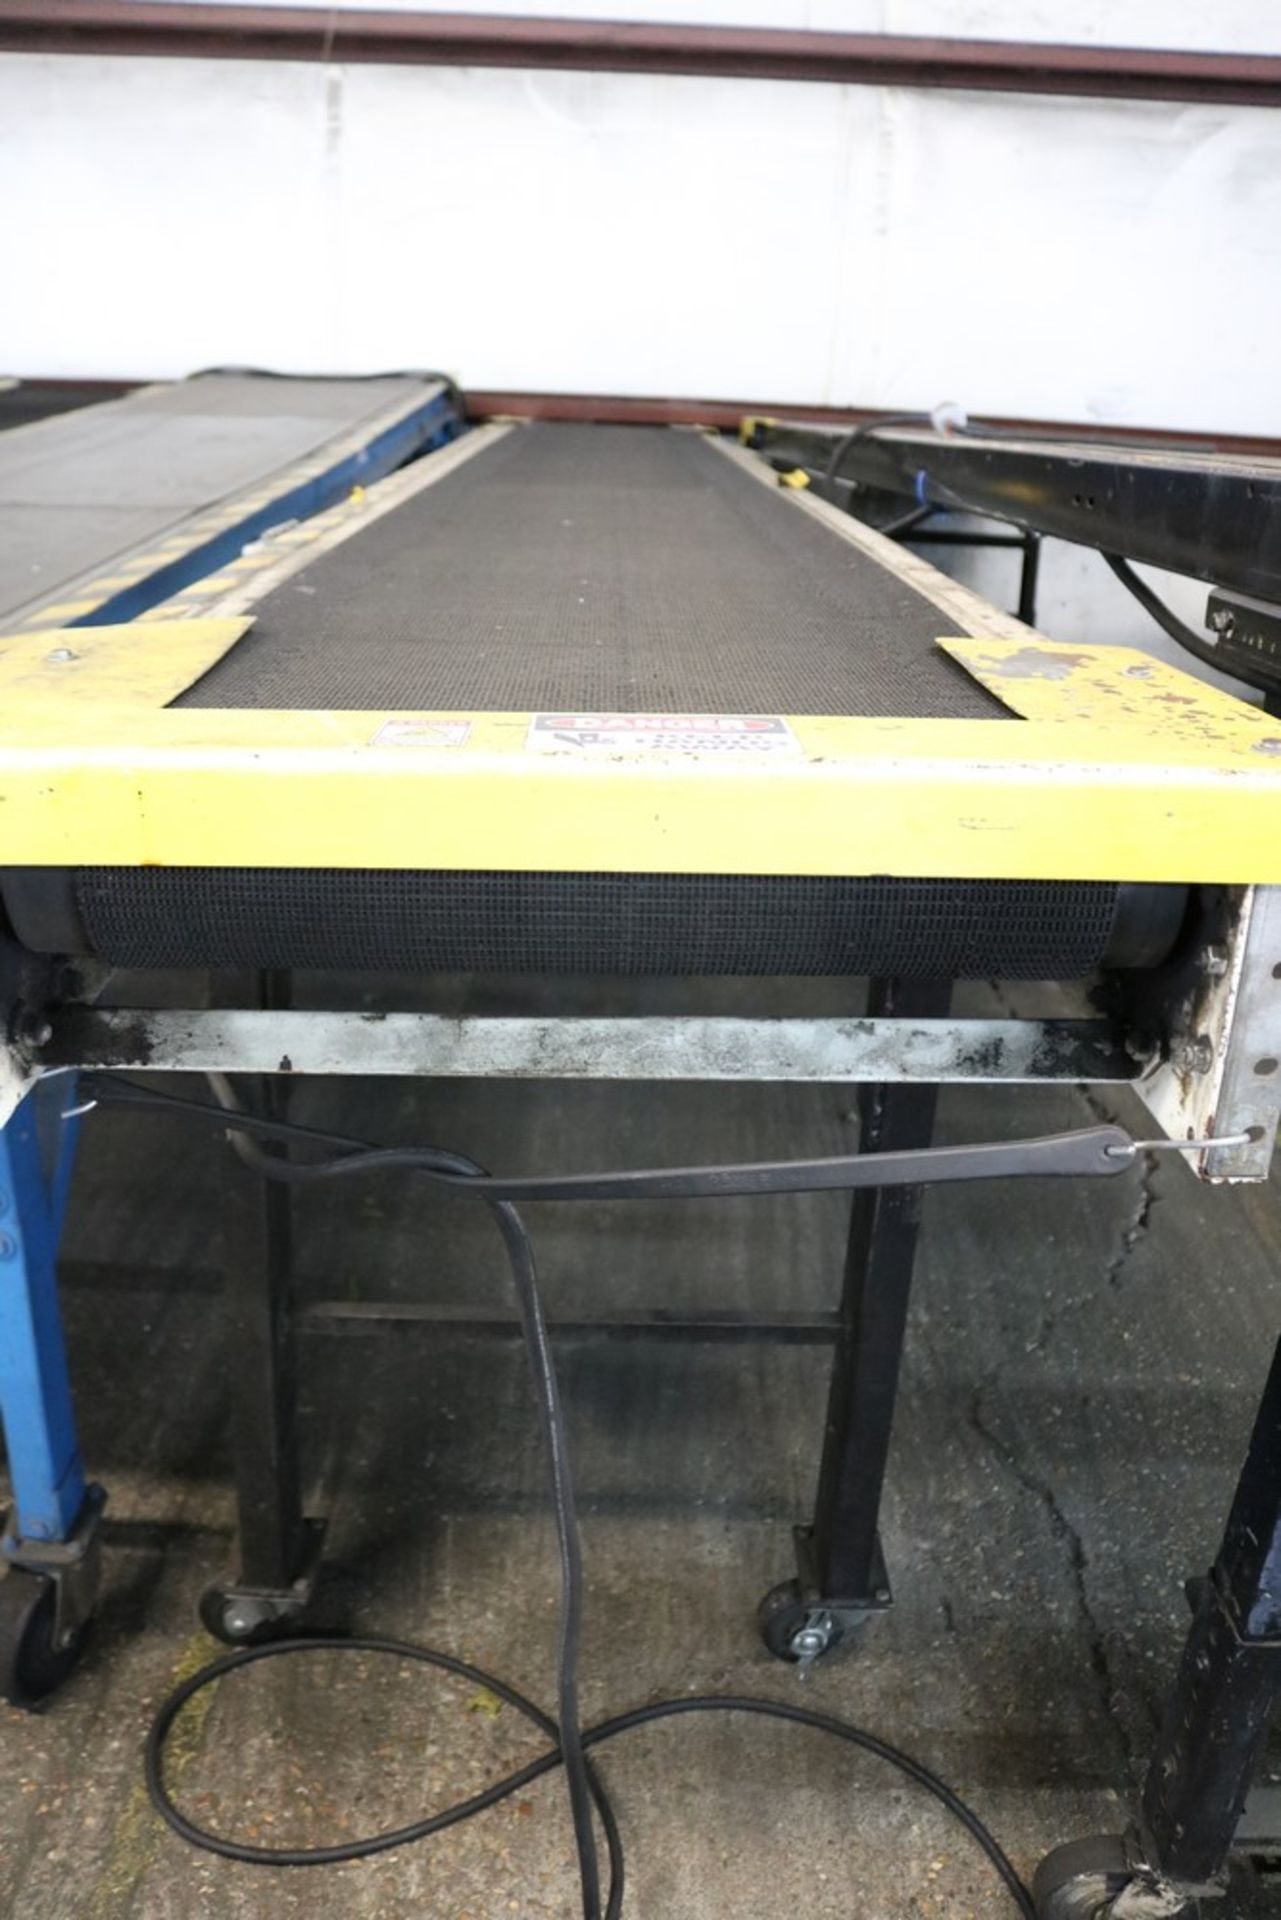 Automated Conveyor Systems, 16' x 24" Electric Parts Conveyor - Image 2 of 6